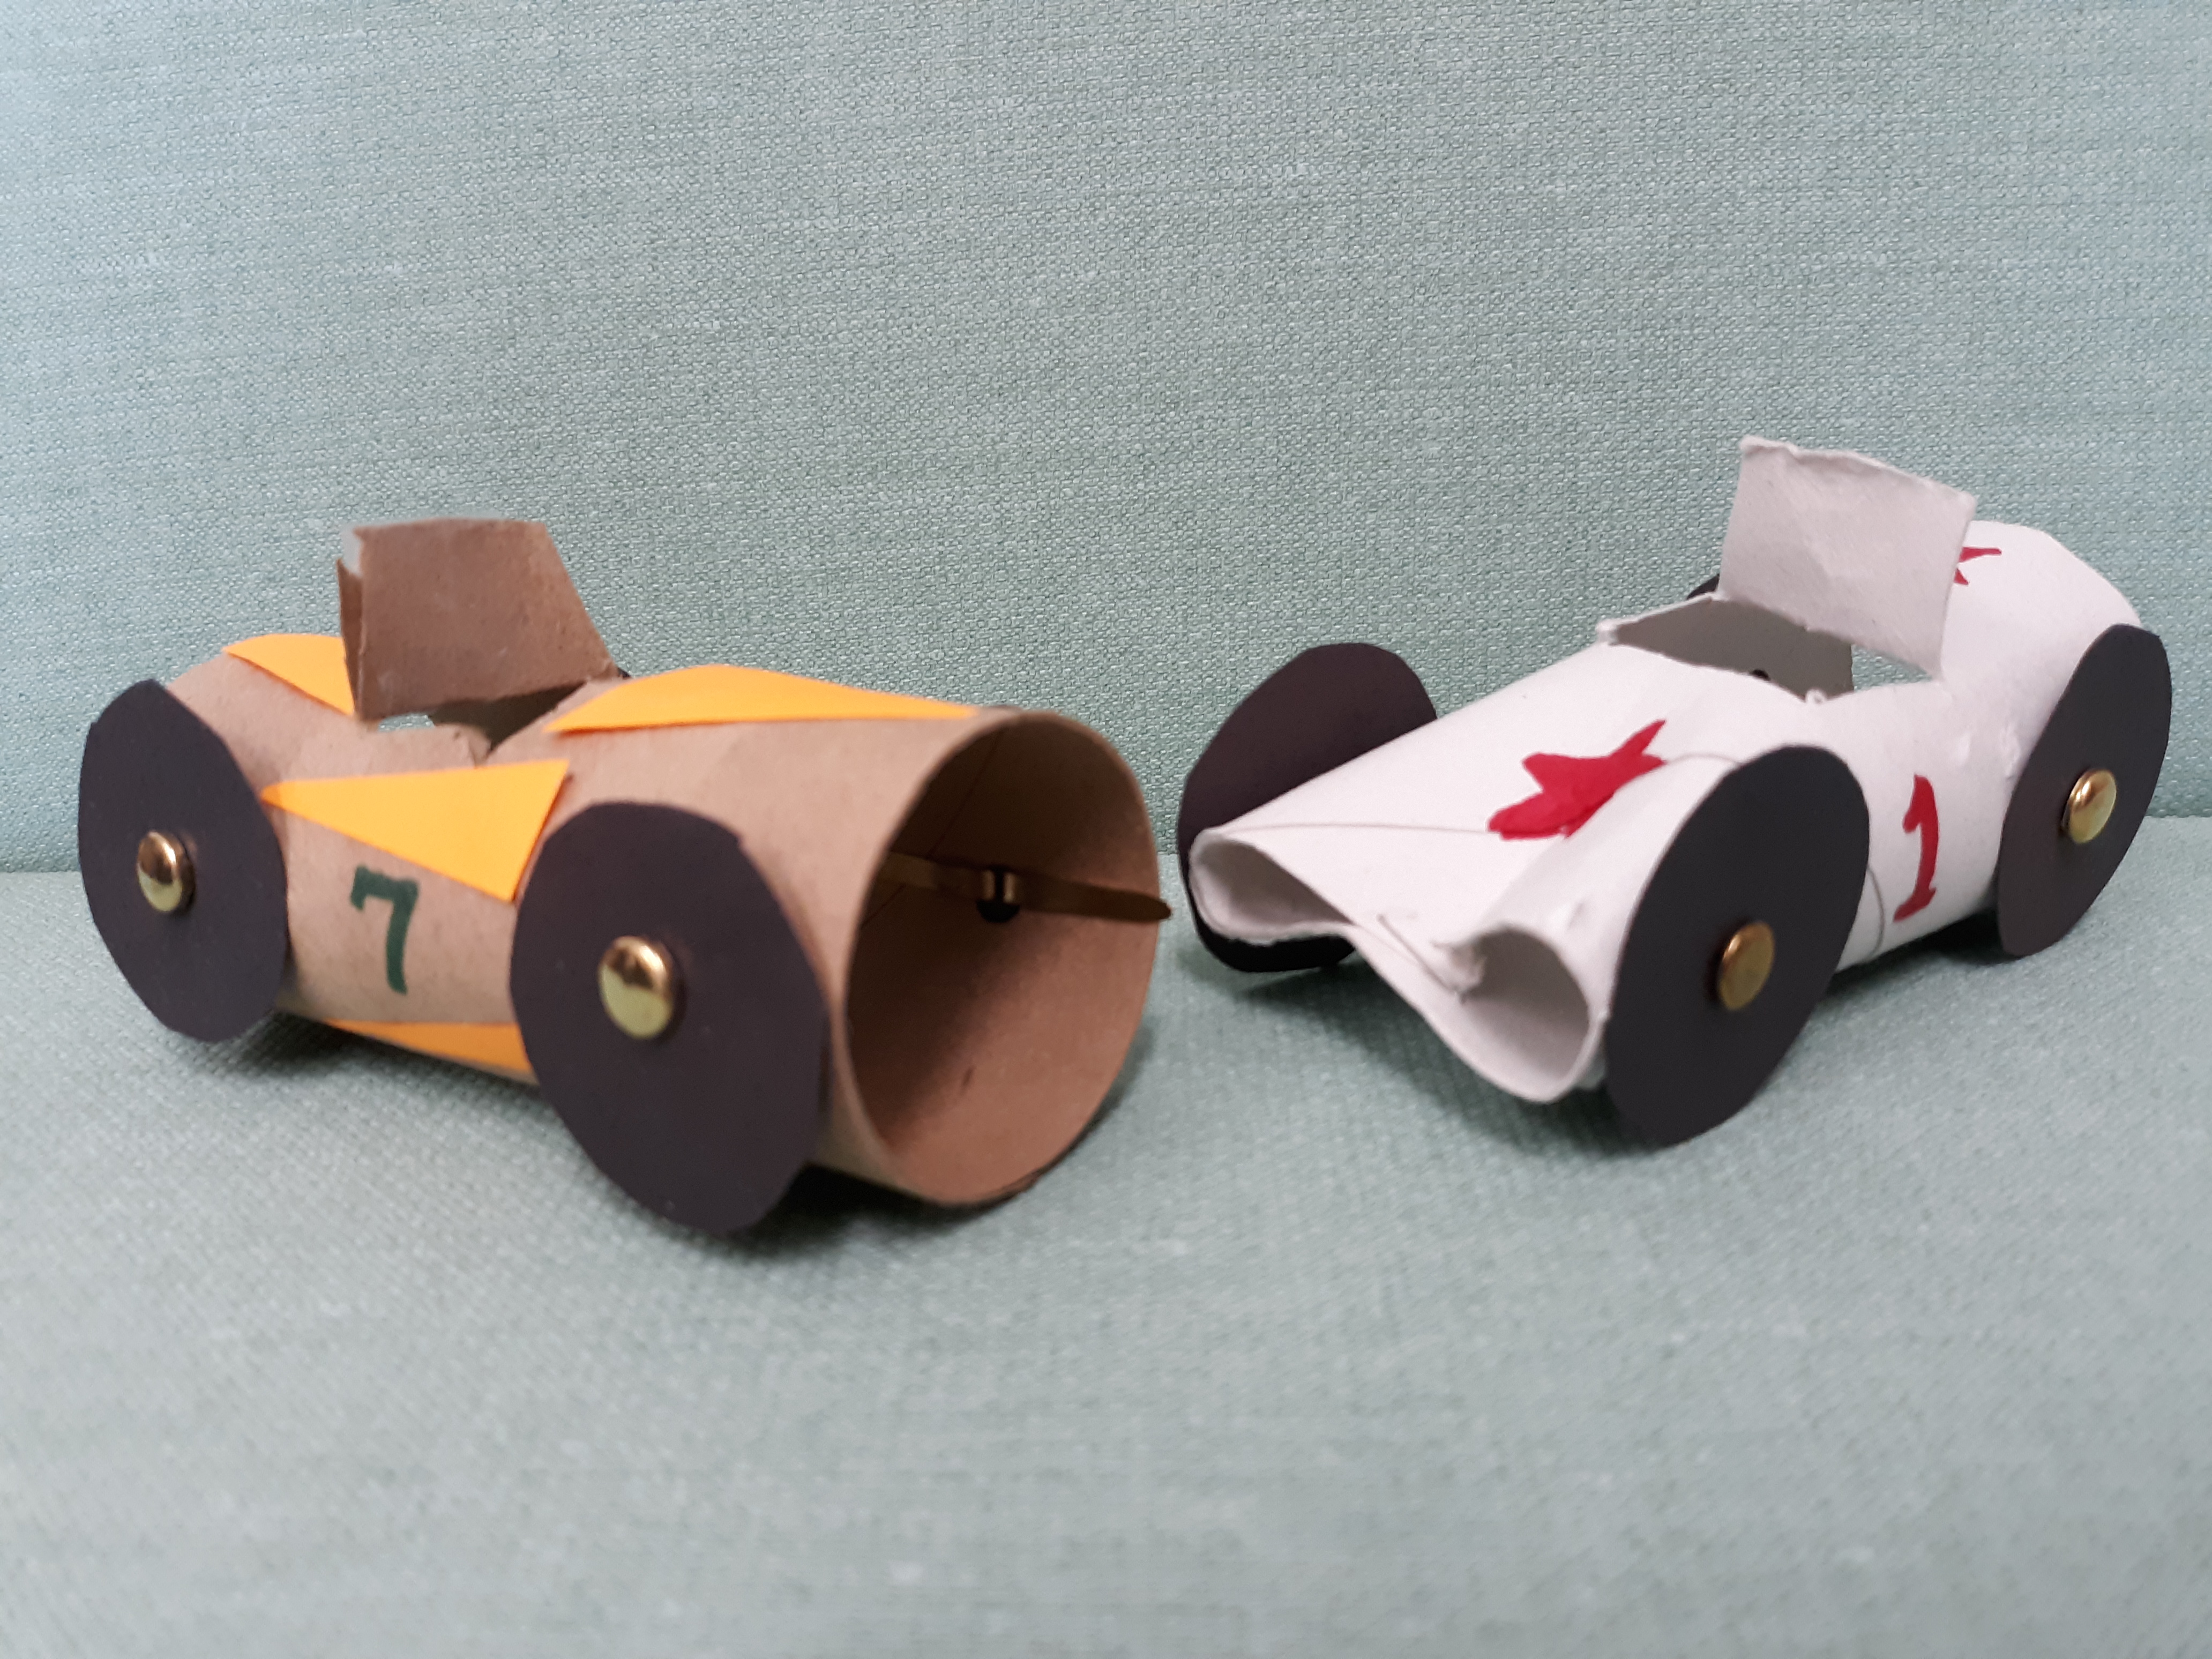 Race Cars made from TP tubes